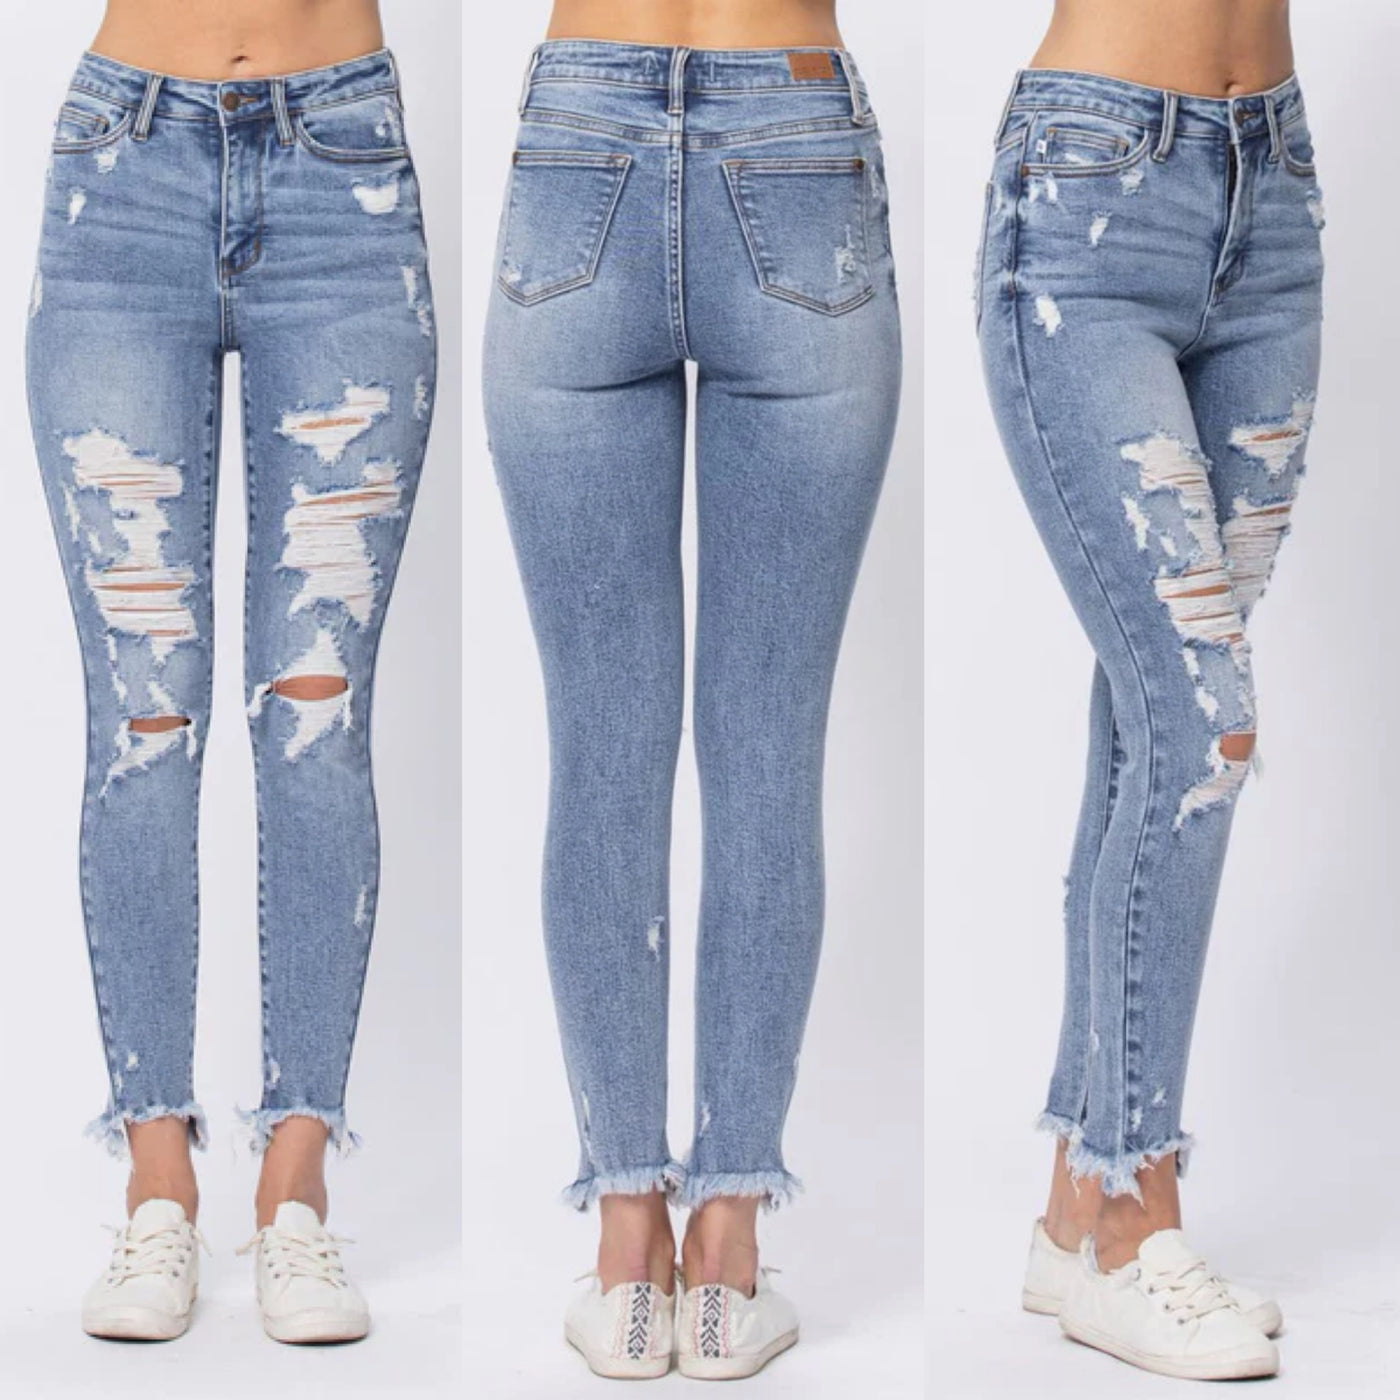 The Dory Distressed Skinny Jeans